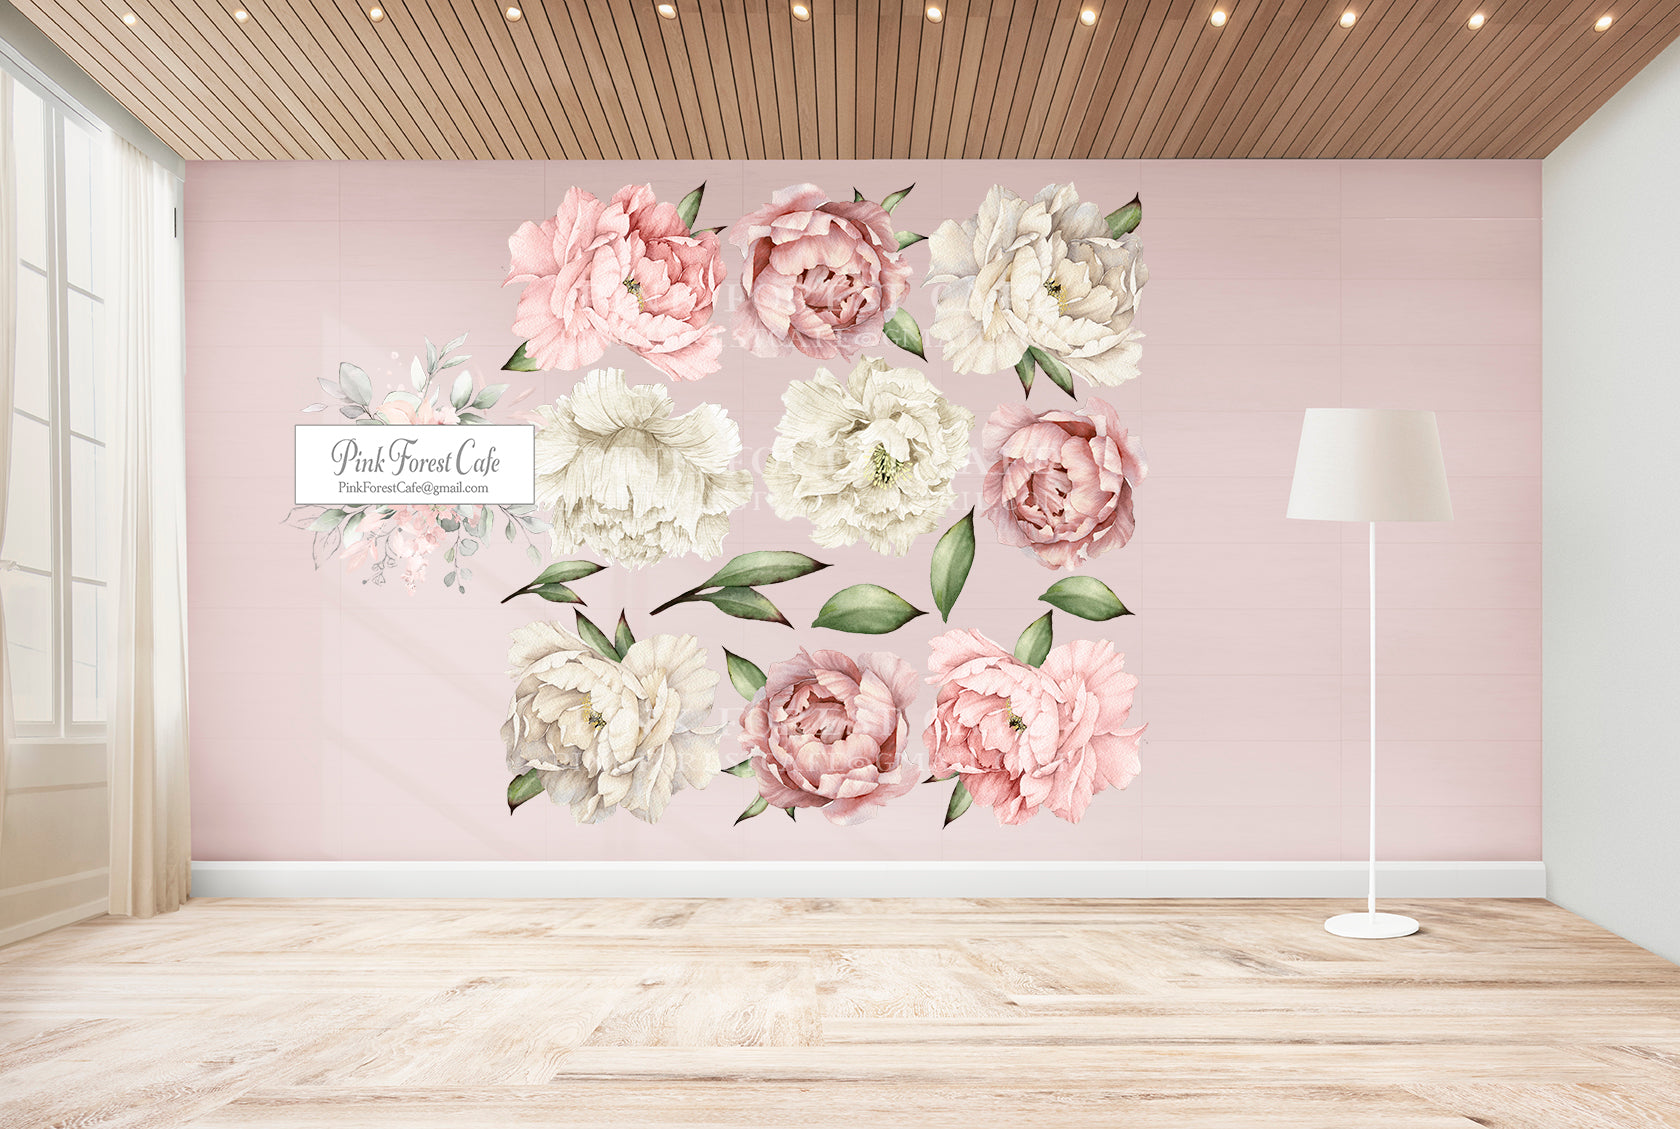 20x20" Pink Blush White Peonies Peony Wall Decal Sticker Rose Floral Watercolor Flowers Boho Decor